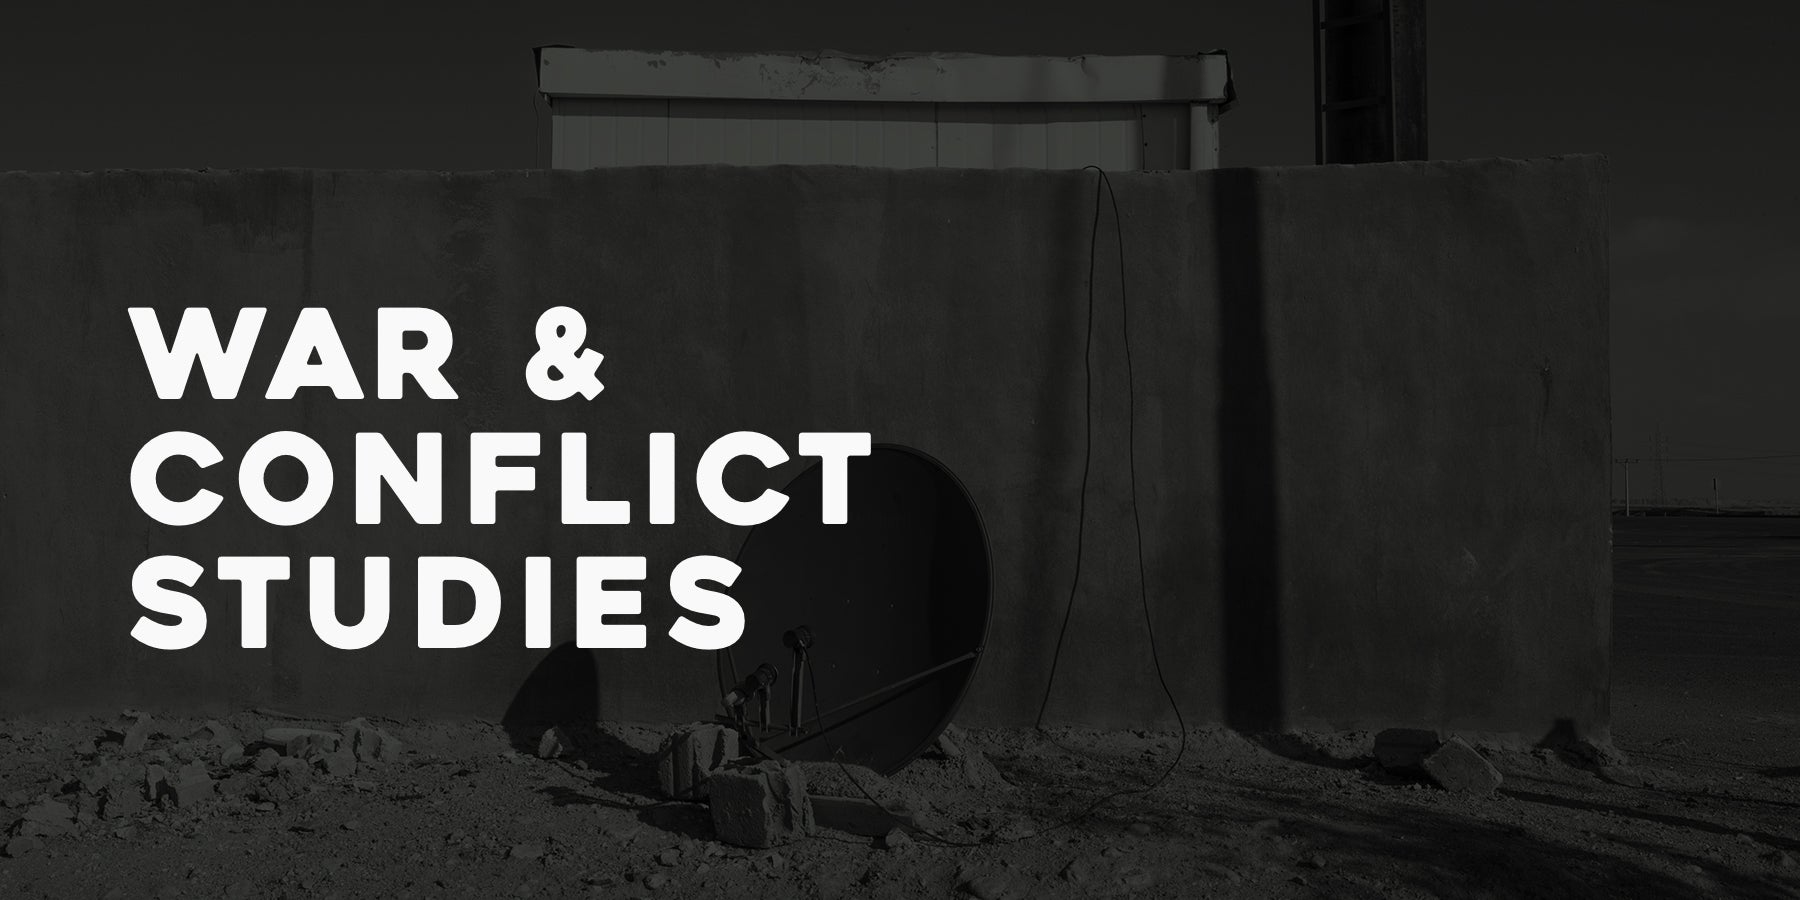 The text "War & Conflict Studies" appears against a black and white image of a TV antenna that has fallen in front of a low, concrete building.